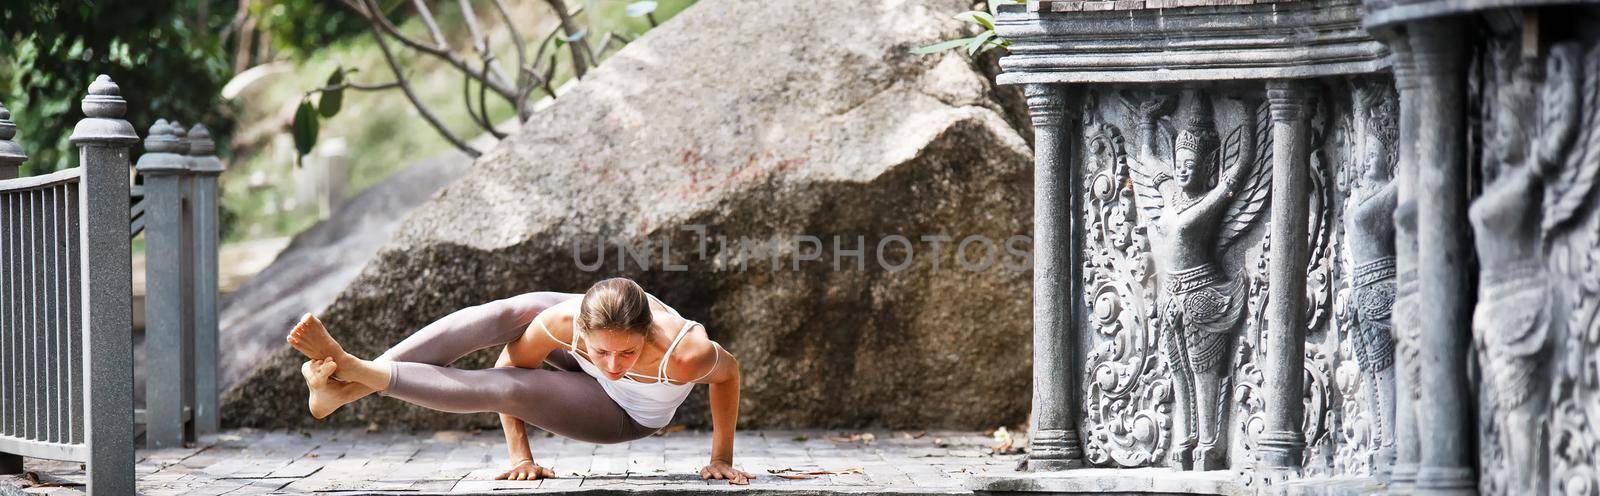 Young woman doing yoga in abandoned temple on wooden platform. Practicing in Thailand